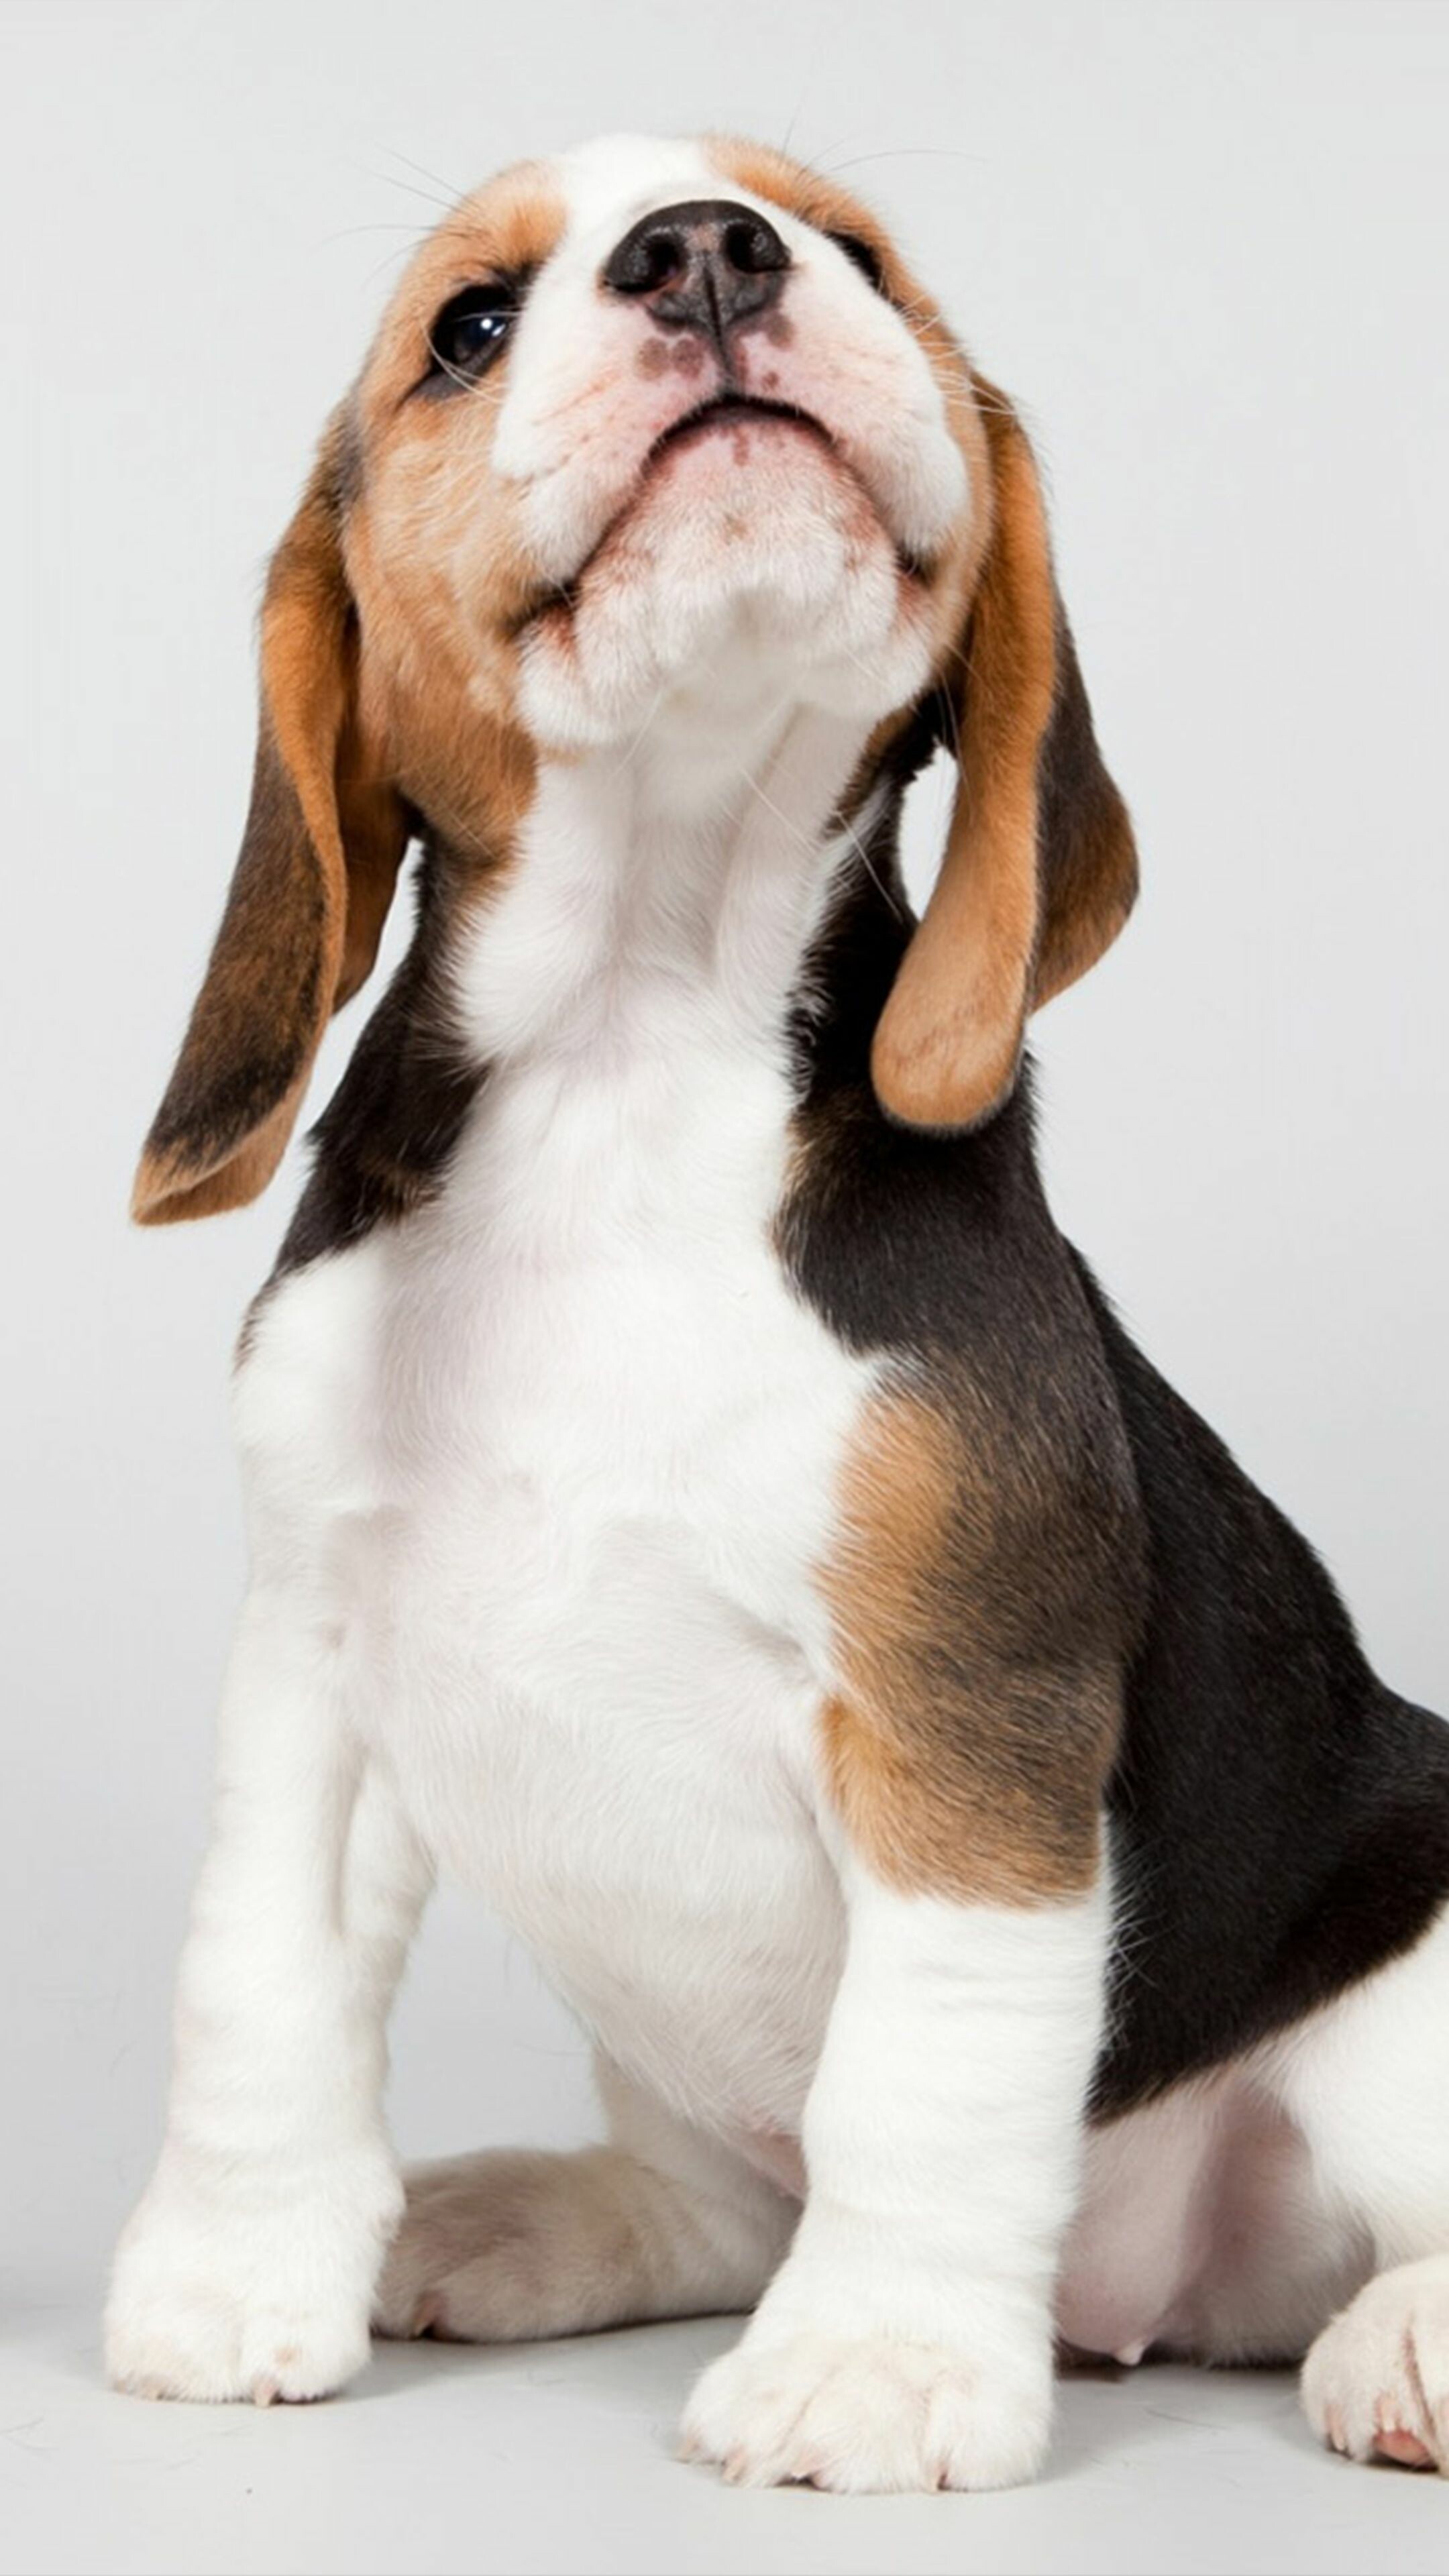 Beagle: The primary breed used as a detection dog for prohibited agricultural imports and foodstuffs. 2160x3840 4K Background.